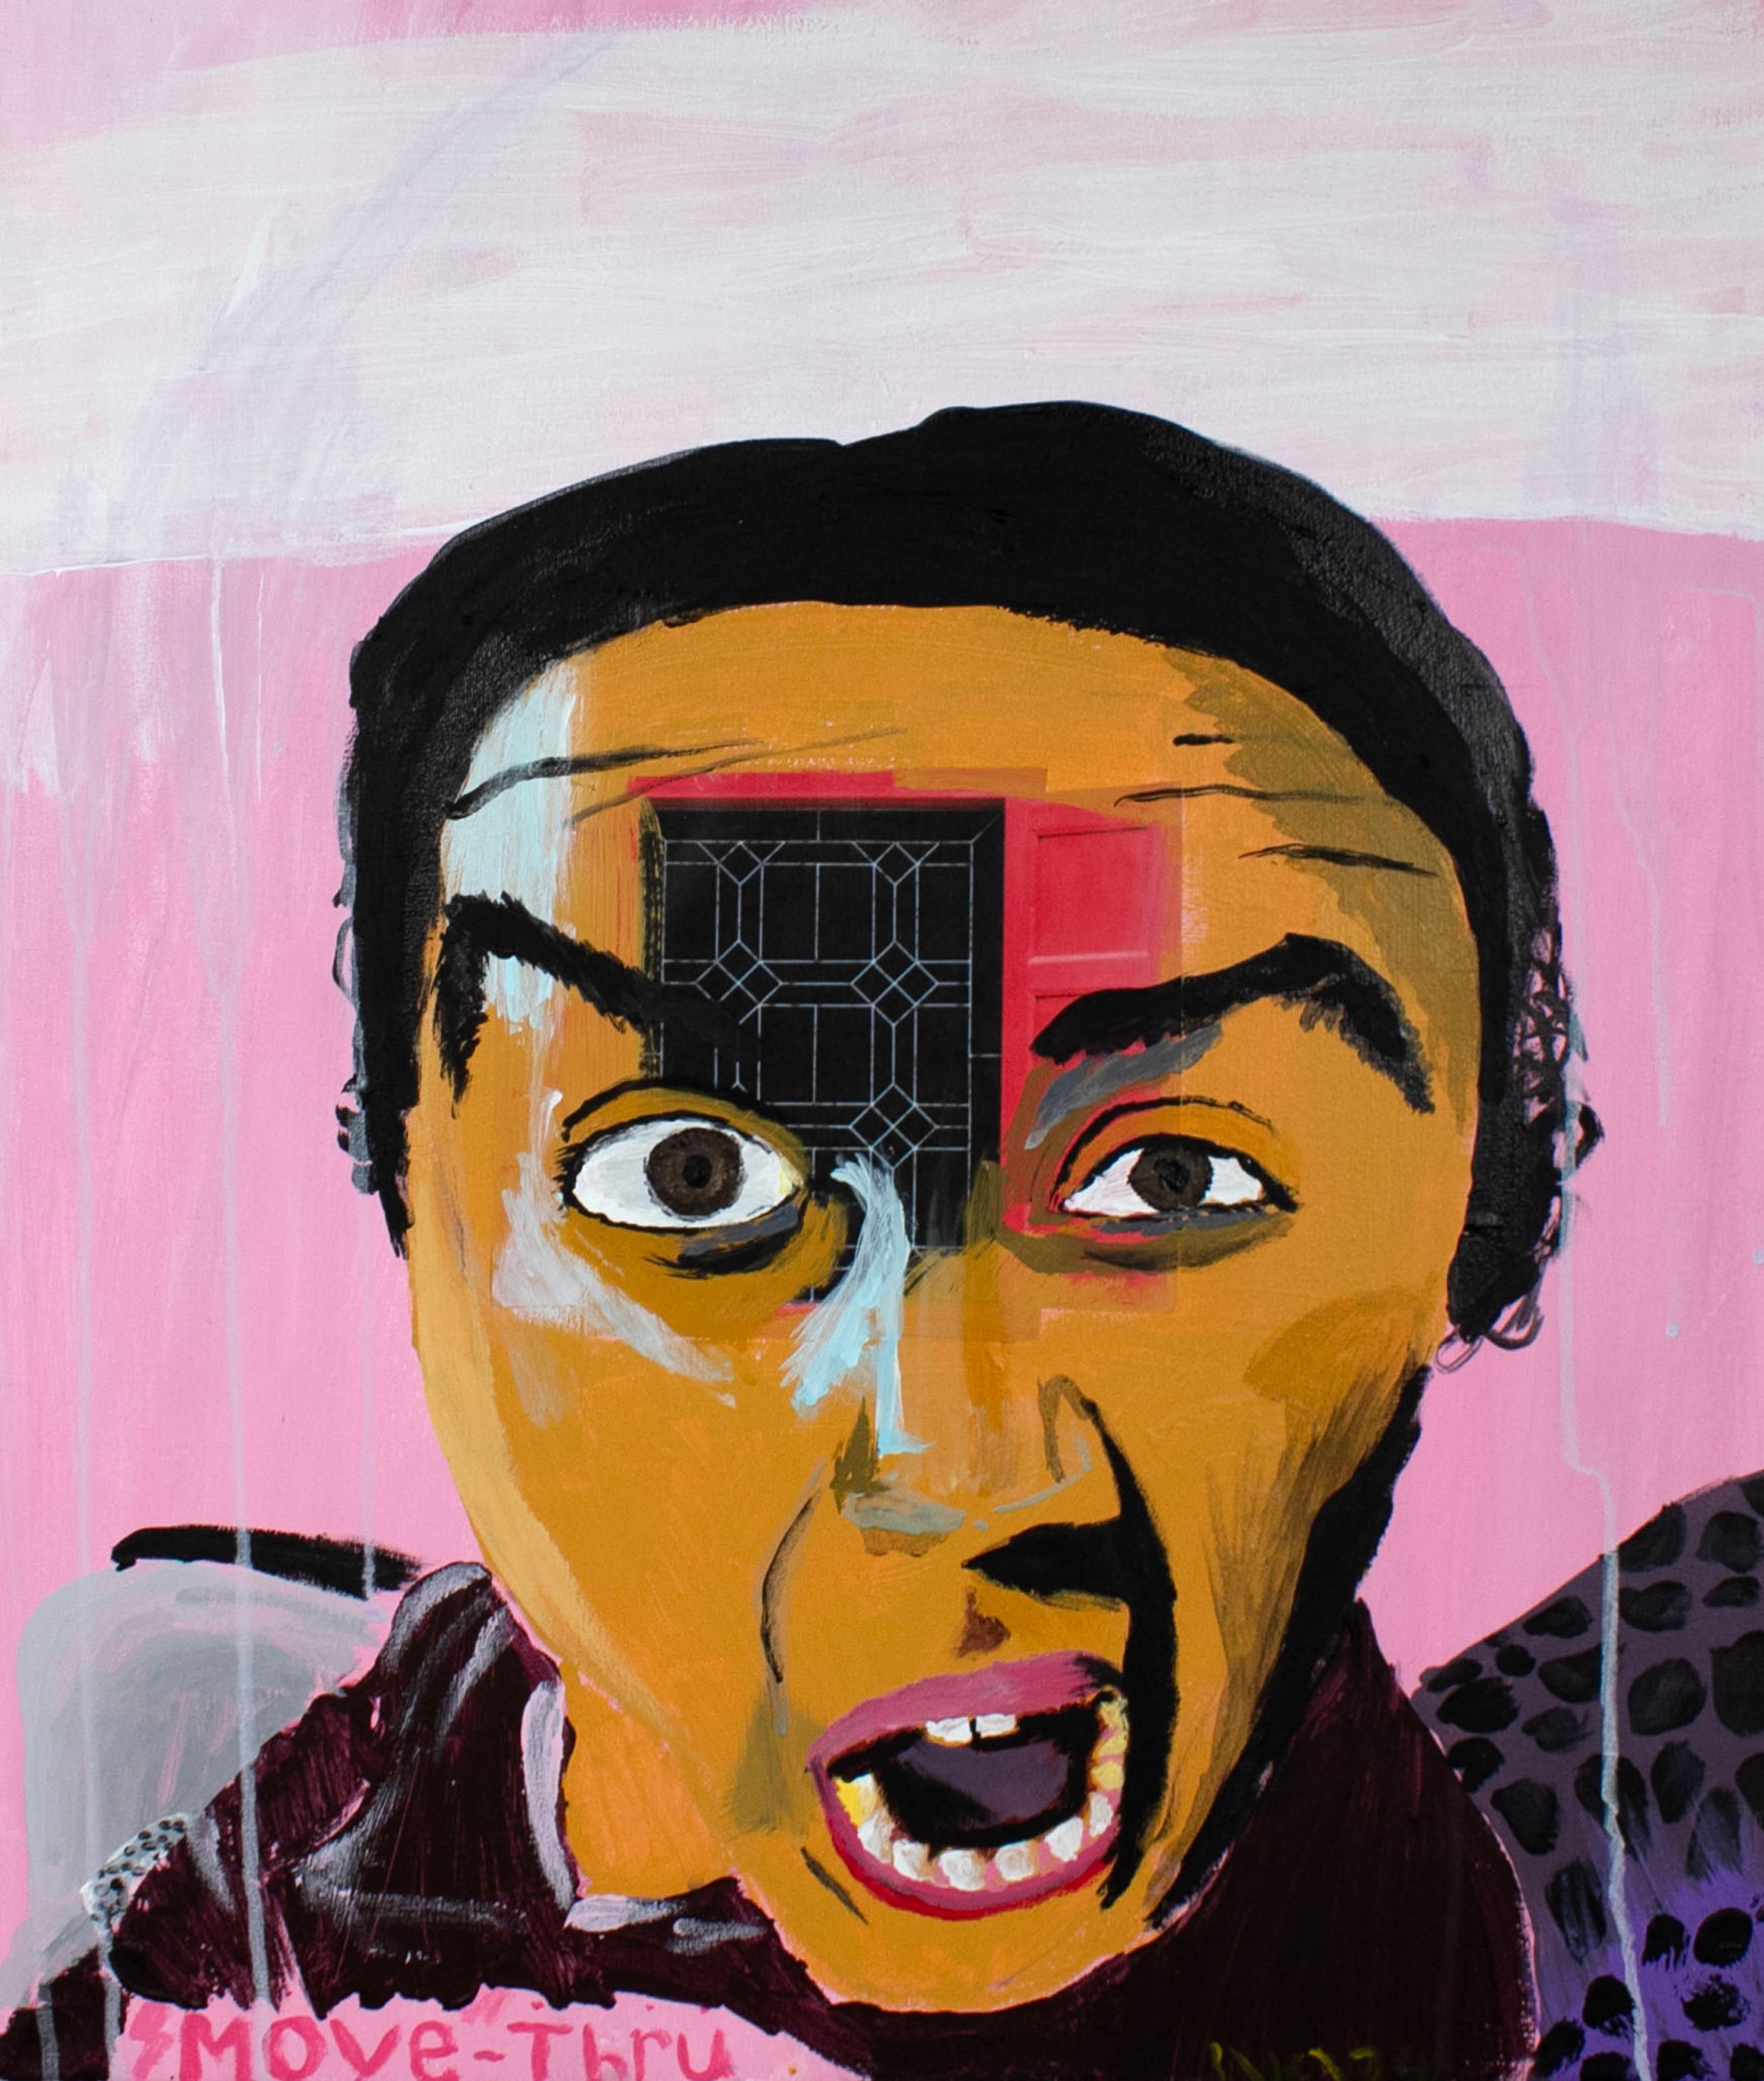 Acrylic paint–and-collage portrait of an adolescent girl facing the viewer. She has black hair and thick, raised black eyebrows. Her mouth is open wide with teeth showing, and her expression is surprised and confrontational. A black rectangular open doorway is on her forehead above her right eye, with a series of fine, white ornamental window lines adorning the black rectangle. A red wooden door opened to the right appears on her forehead next to the black doorway. At bottom left, MOVE-THRU is written in dark pink capital letters on a narrow, light pink background superimposed near the top of the girl's black shirt. Behind the girl to the right is a small patch of purple with black leopard spots. The background is mostly pink with a semitransparent white horizontal band painted at top behind the girl's head.